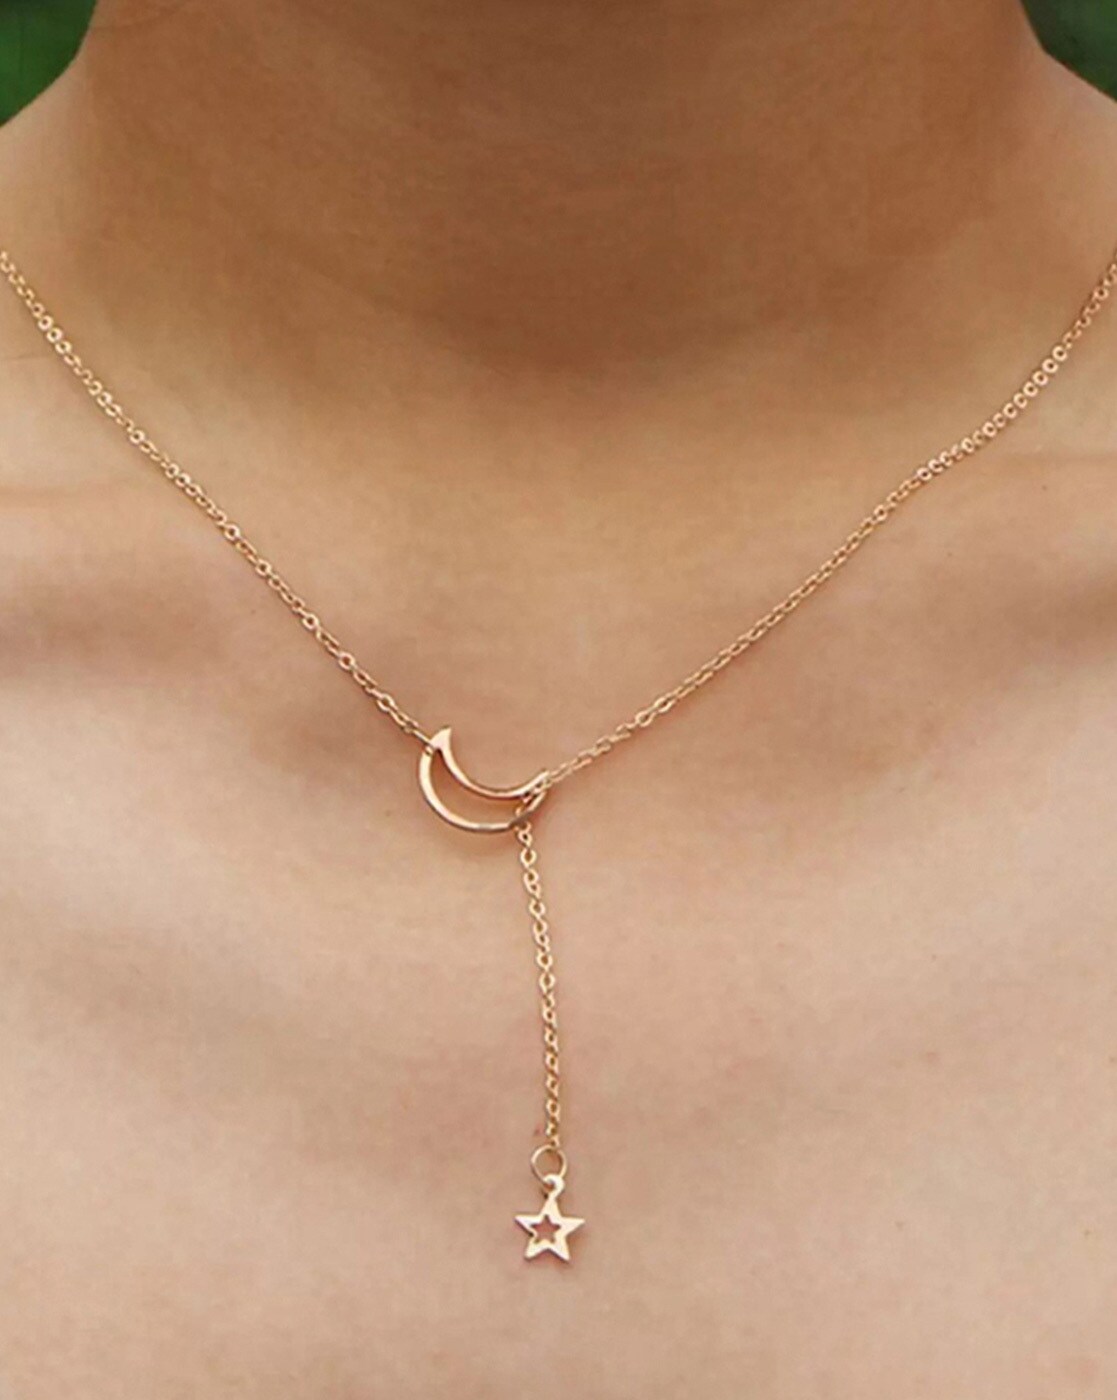 Buy 14K Solid Gold Crescent Moon Pendant, Rose Gold Half Moon Necklace, Moon  Necklace, Solid Gold Moon Necklace, Gold Necklace, 14k Gold Charm Online in  India - Etsy